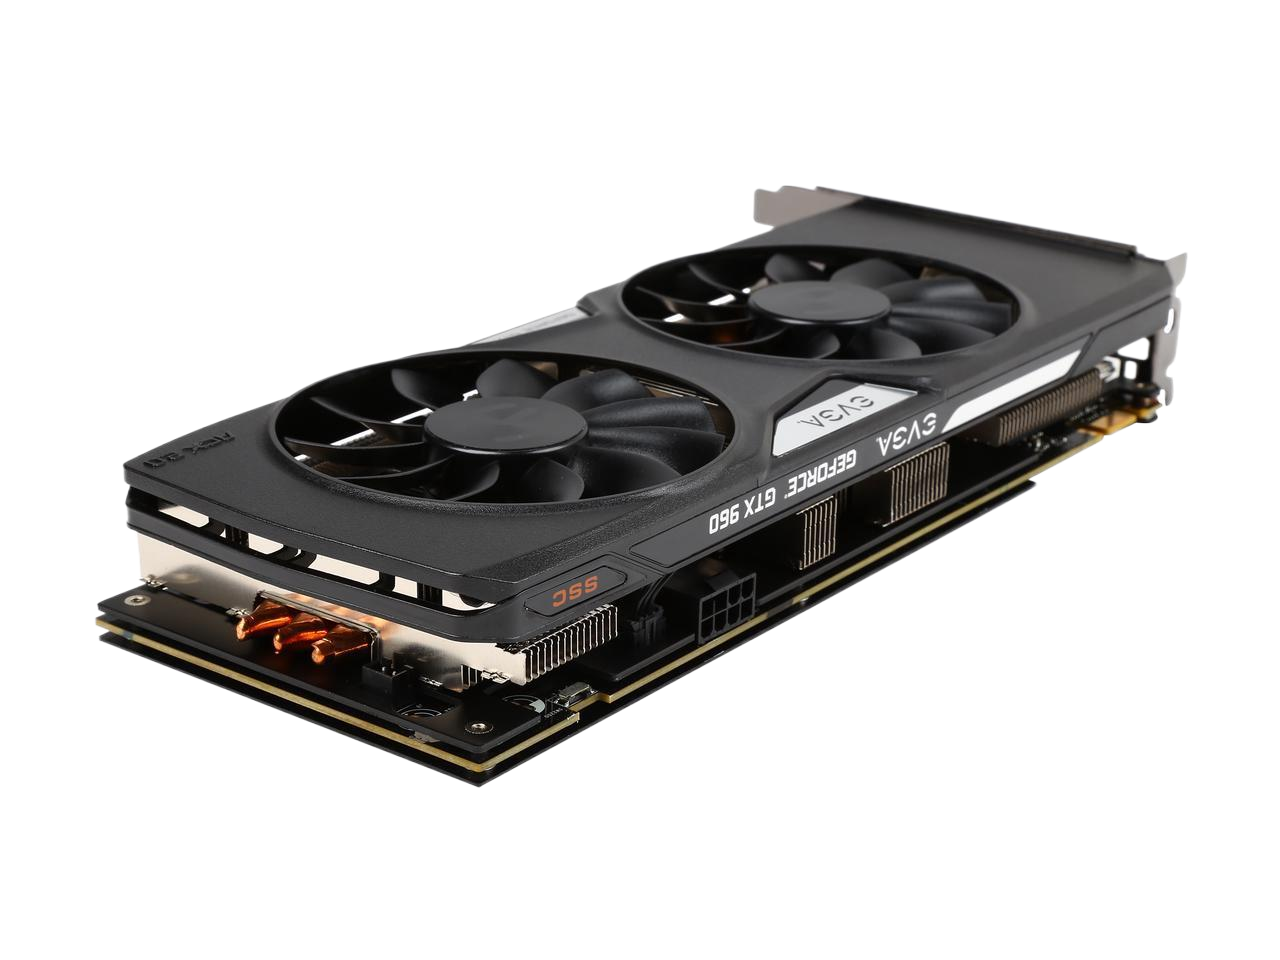 EVGA GeForce GTX 960 4GB SSC GAMING w/ Installed Backplate Graphics Card 04G-P4-3967-KR